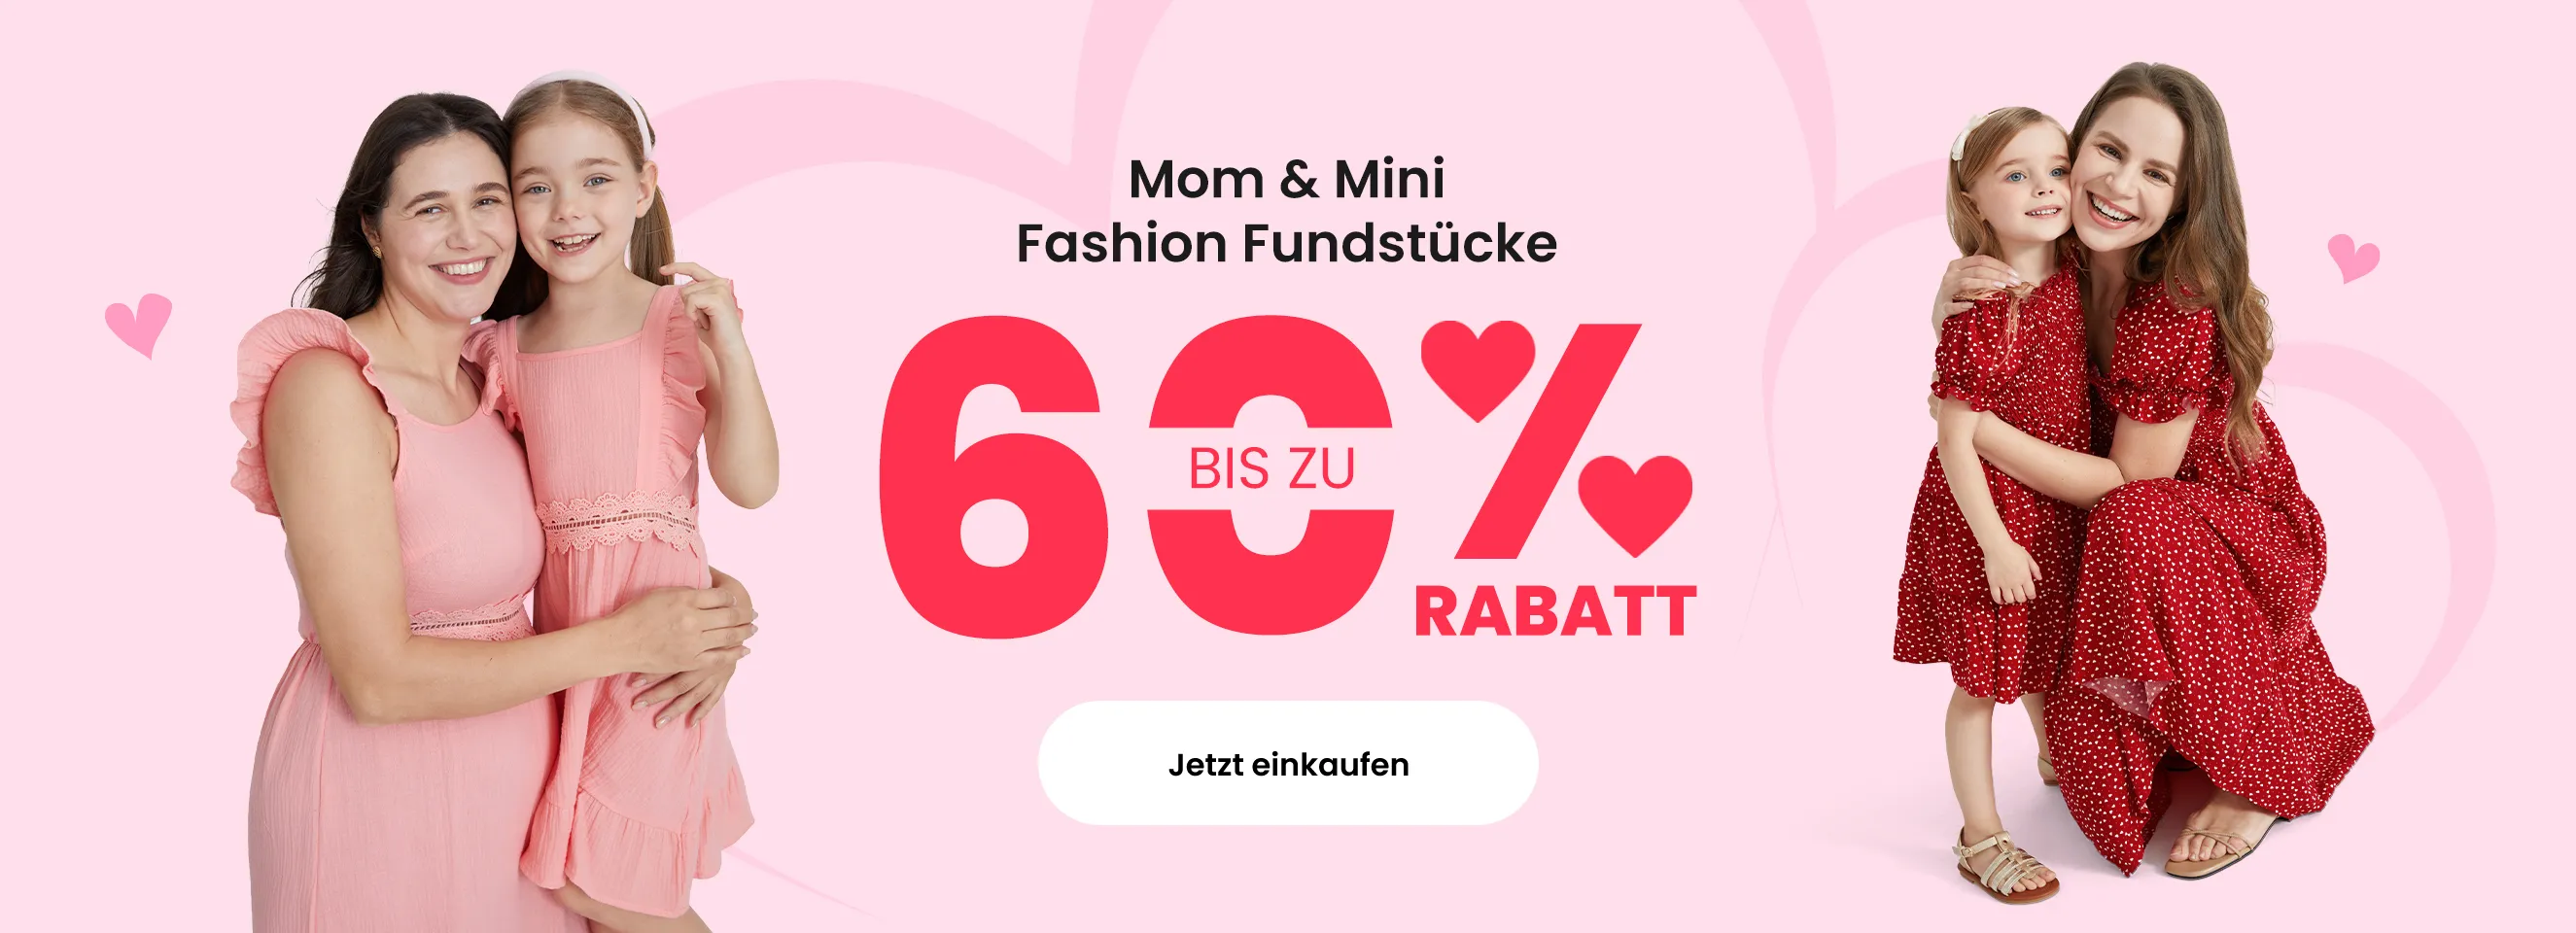 Click it to join Mom & Mini Fashion Finds activity